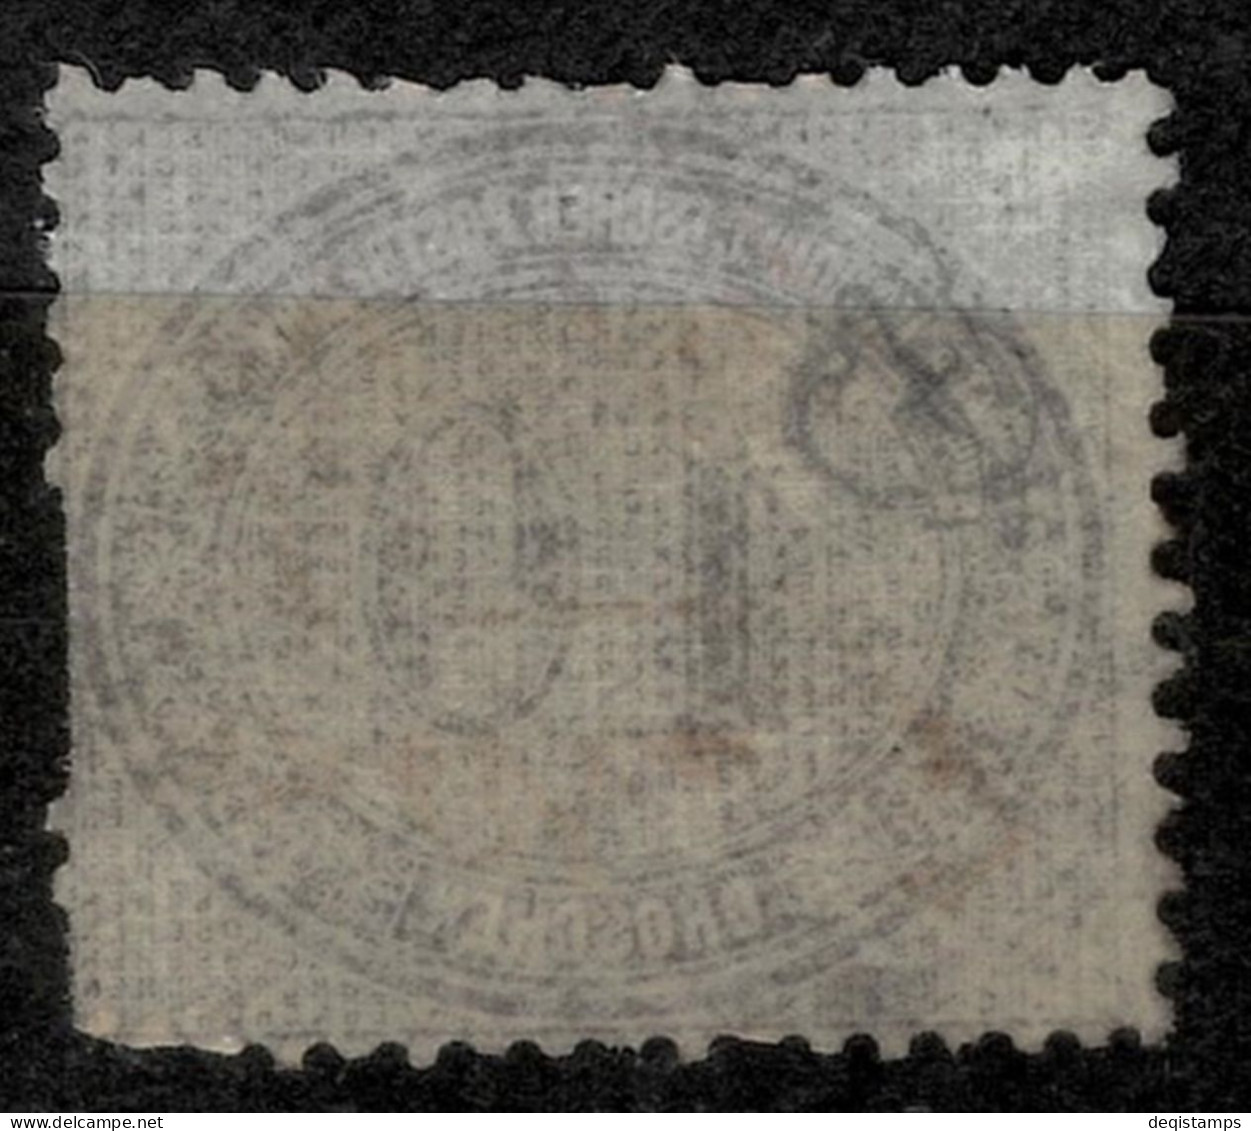 Northern Germany Confederation - NDP 1869 - 10gr  MNG - Postfris